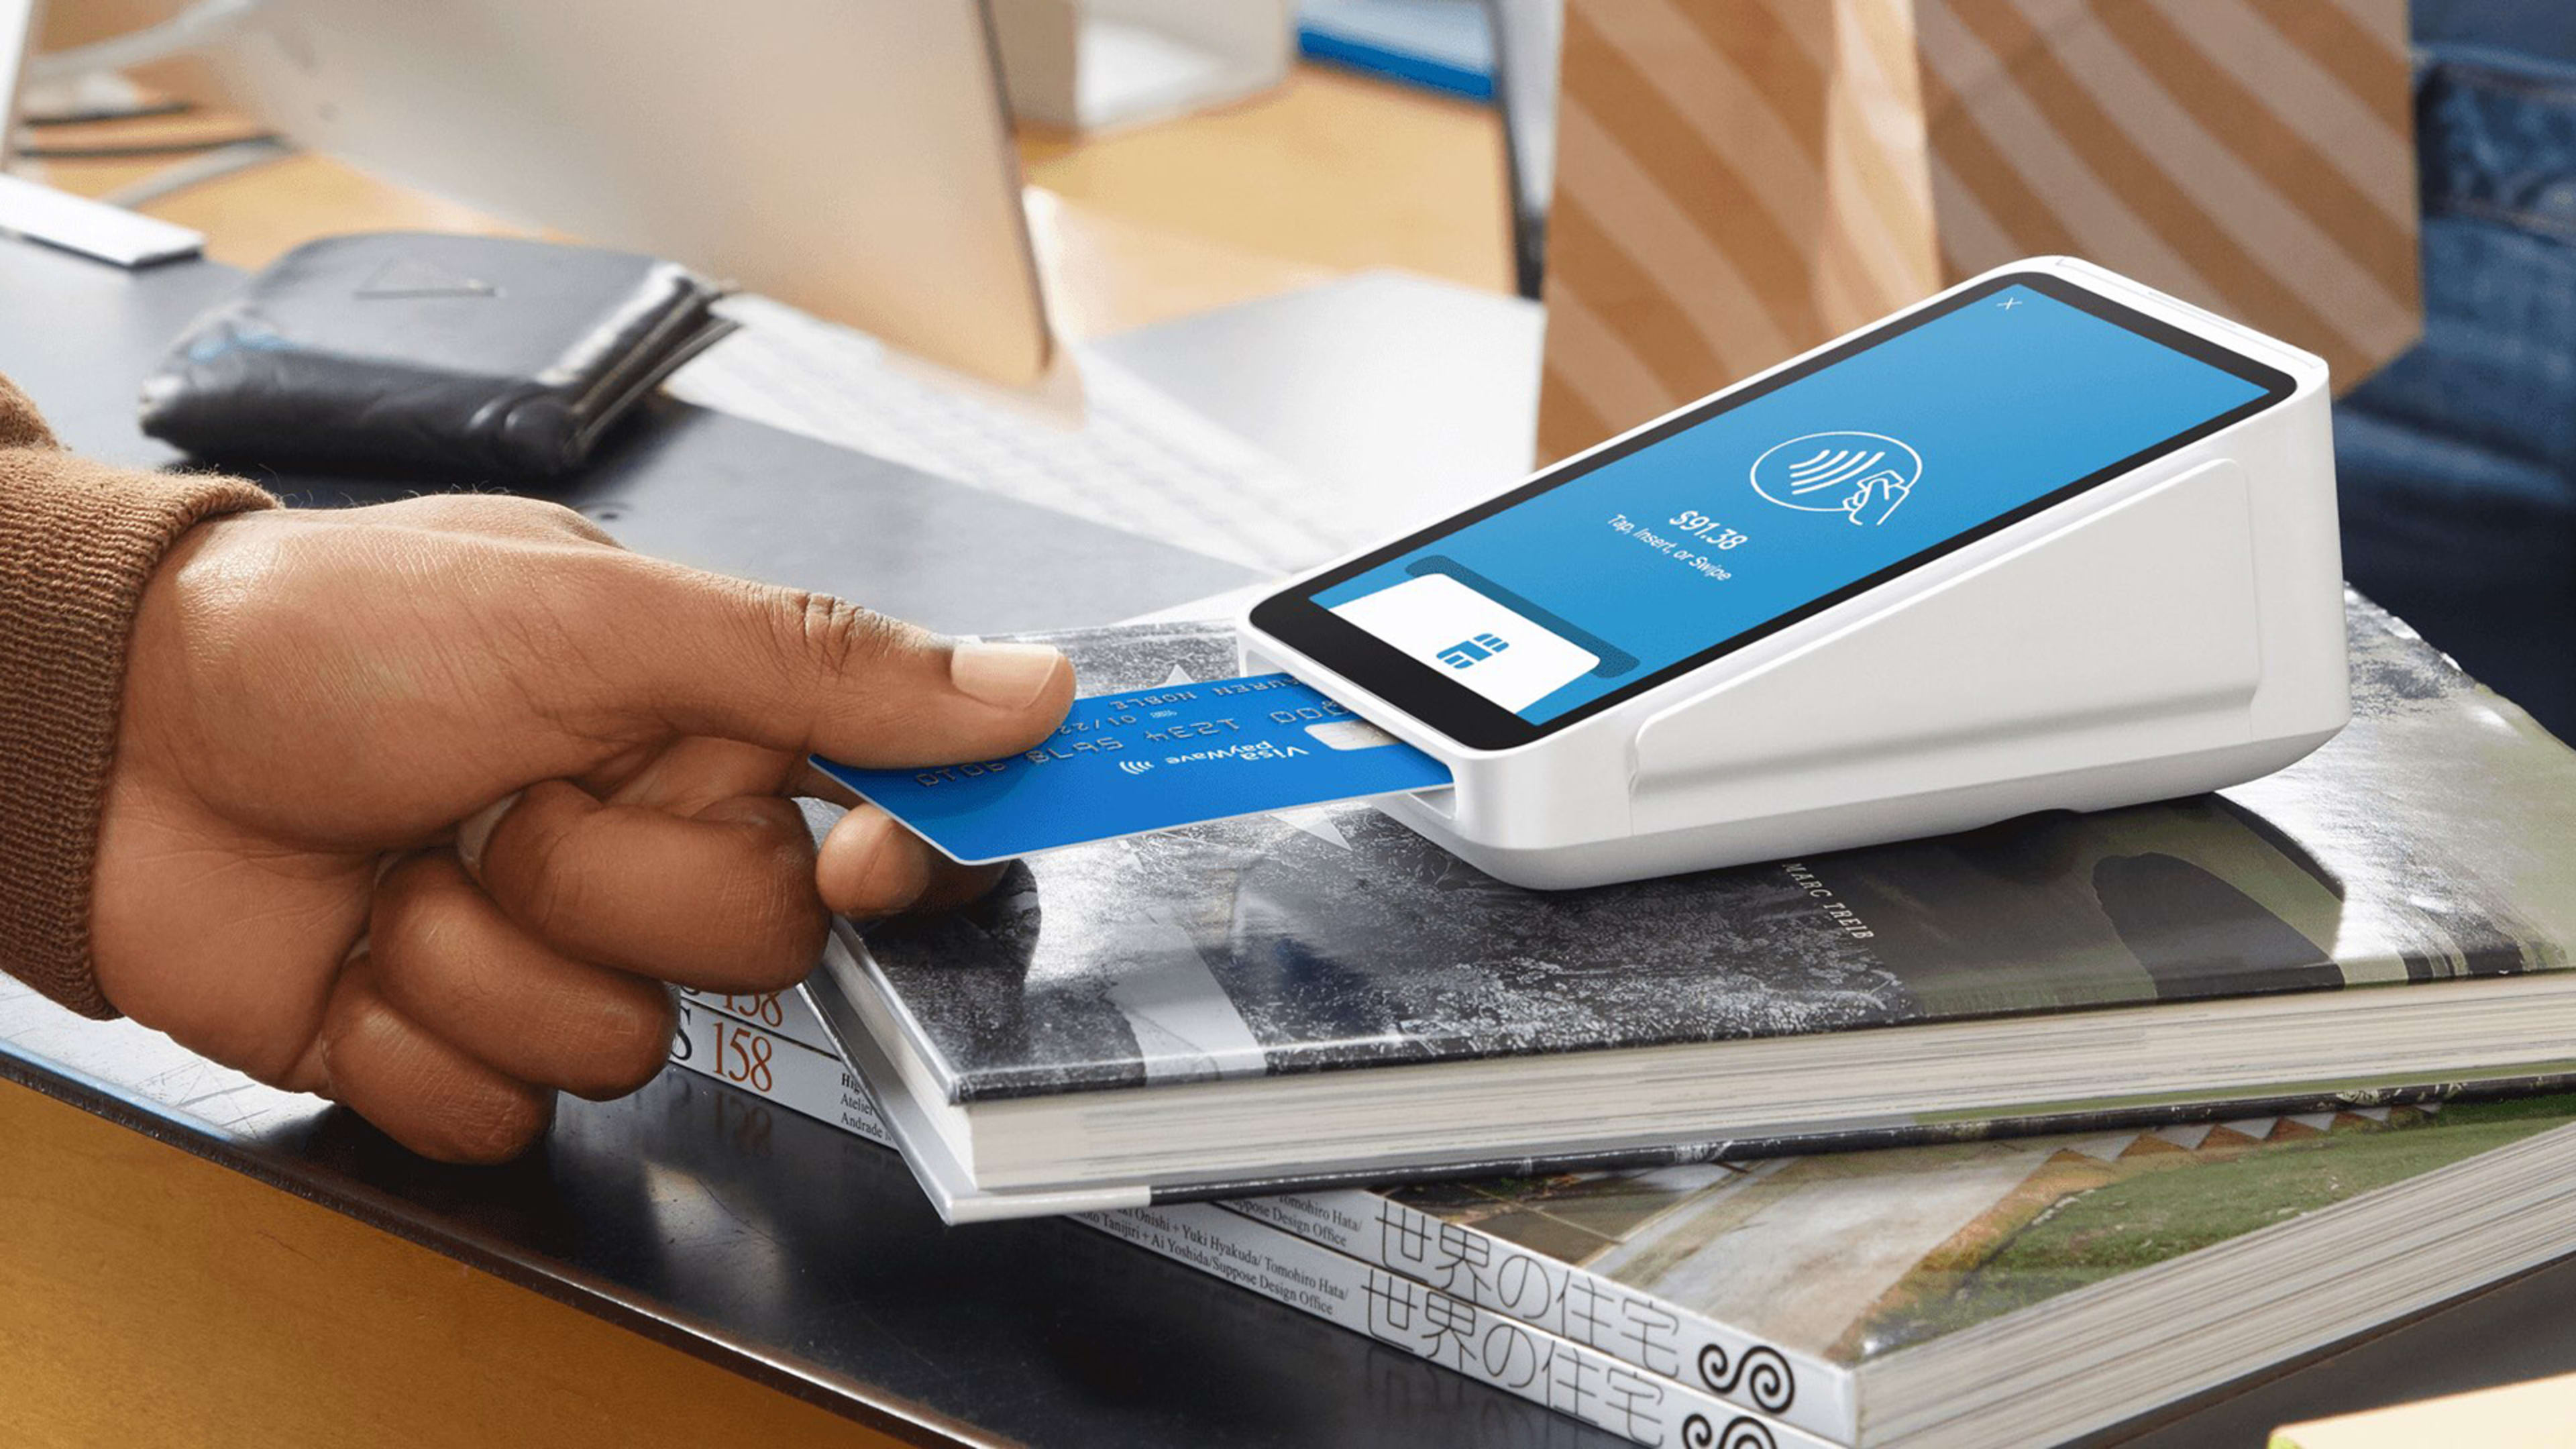 Square takes on the clunky old-school payment terminal